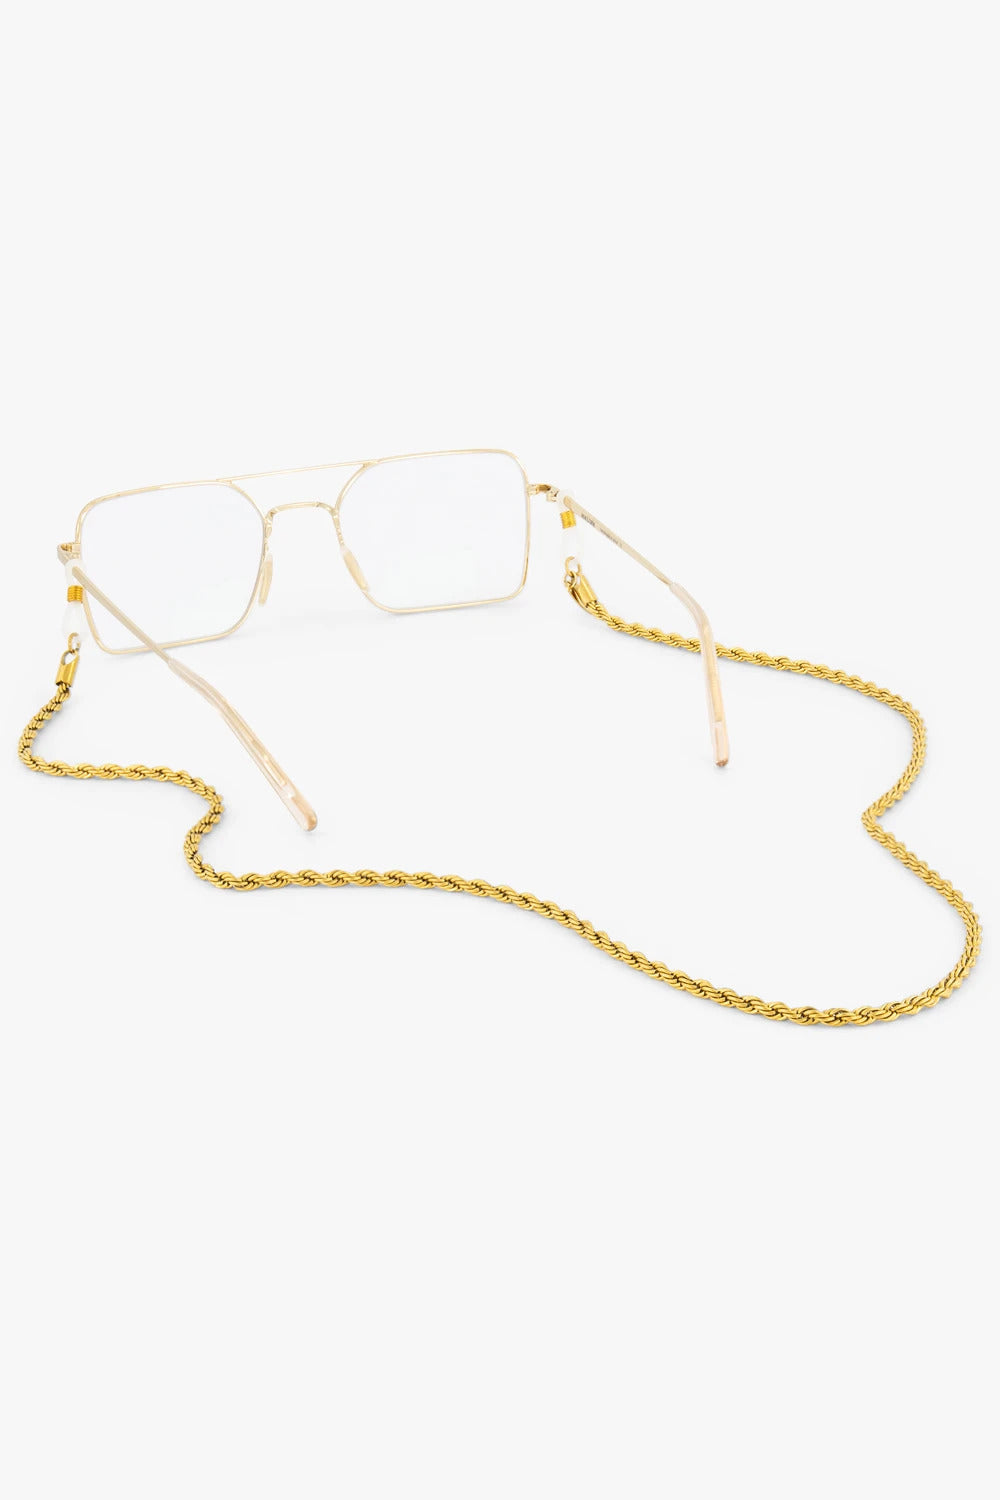 Sunnycord® | Snake chain Gold